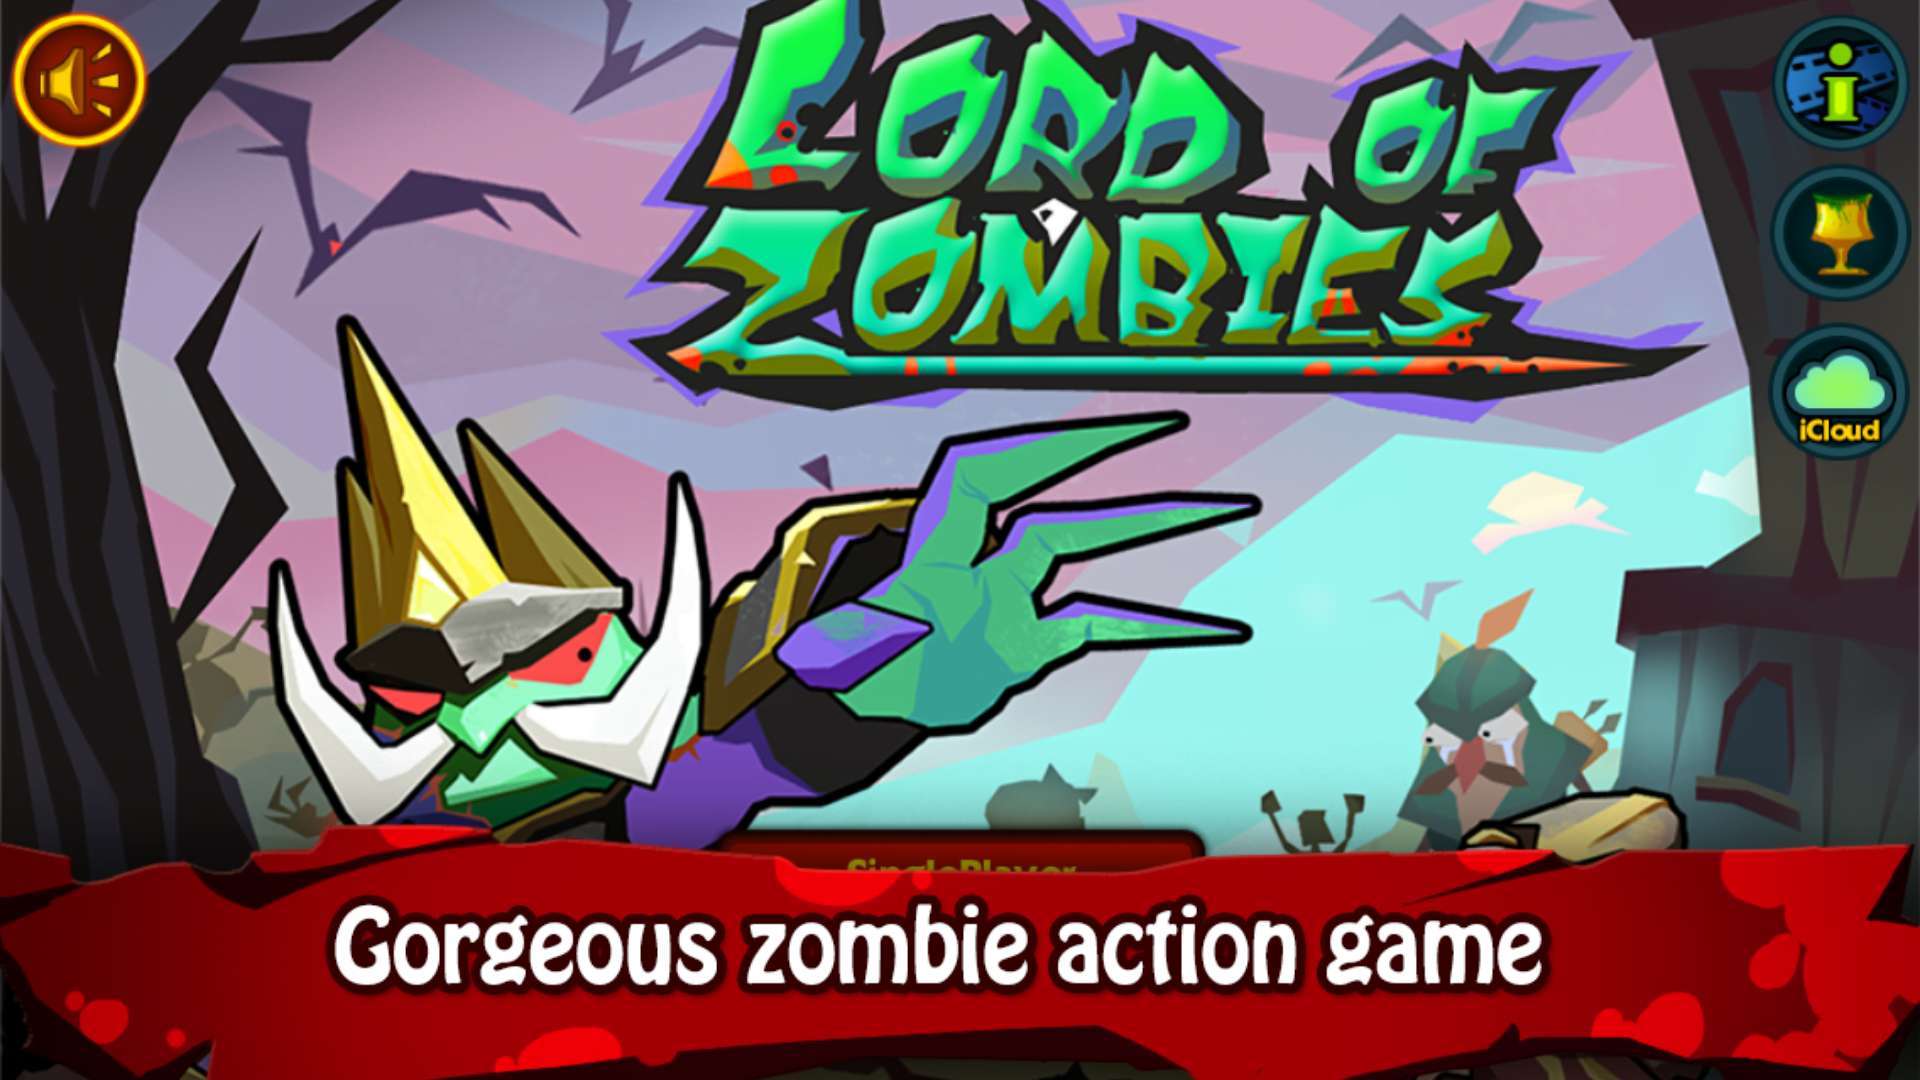 Lord of Zombies: Game RPG Action Seru